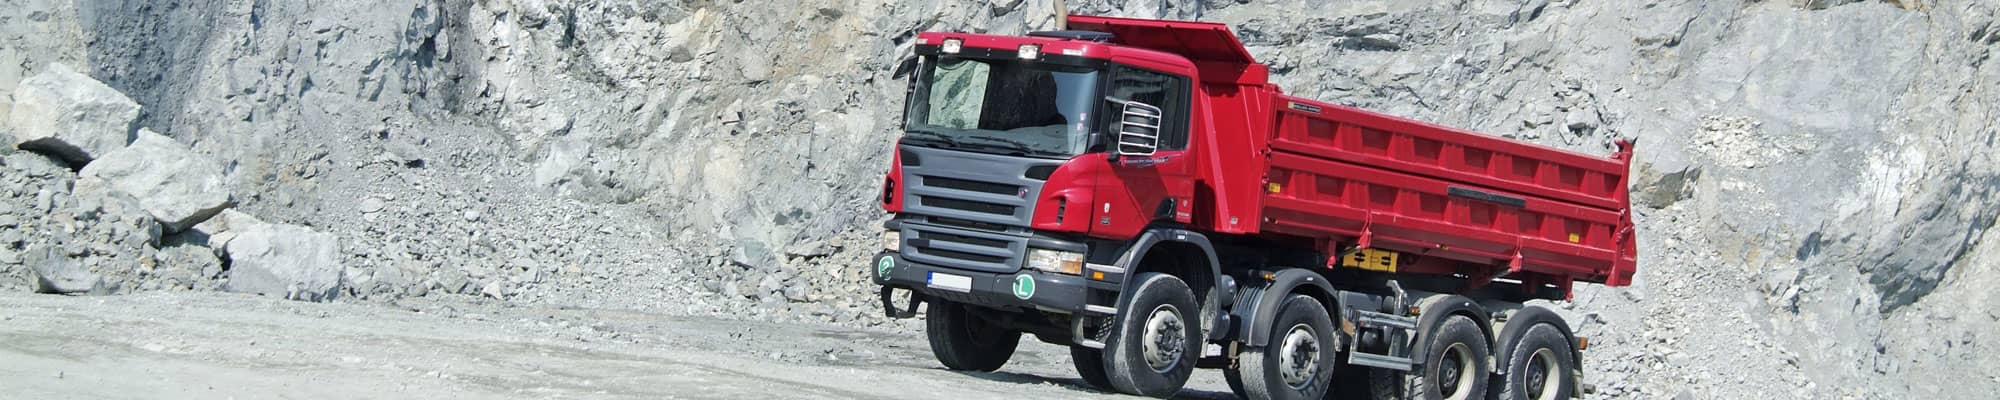 Lorry driving lesson in North Wales Quarry